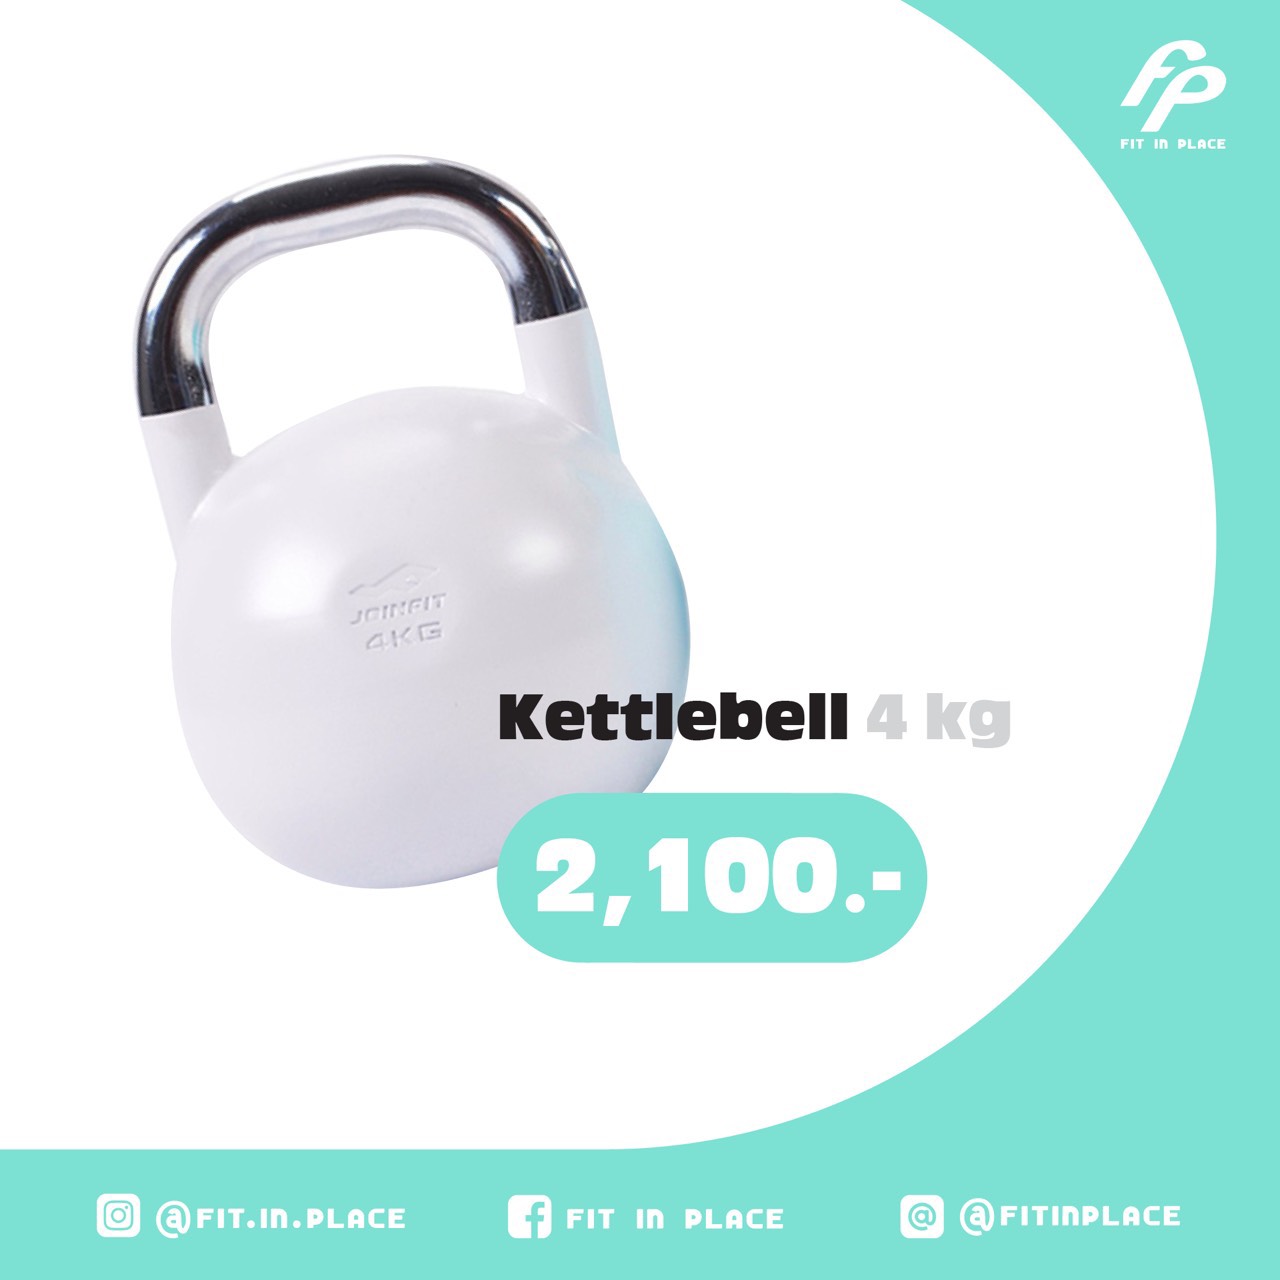 Fit in Place - Joinfit Kettlebell 4kg